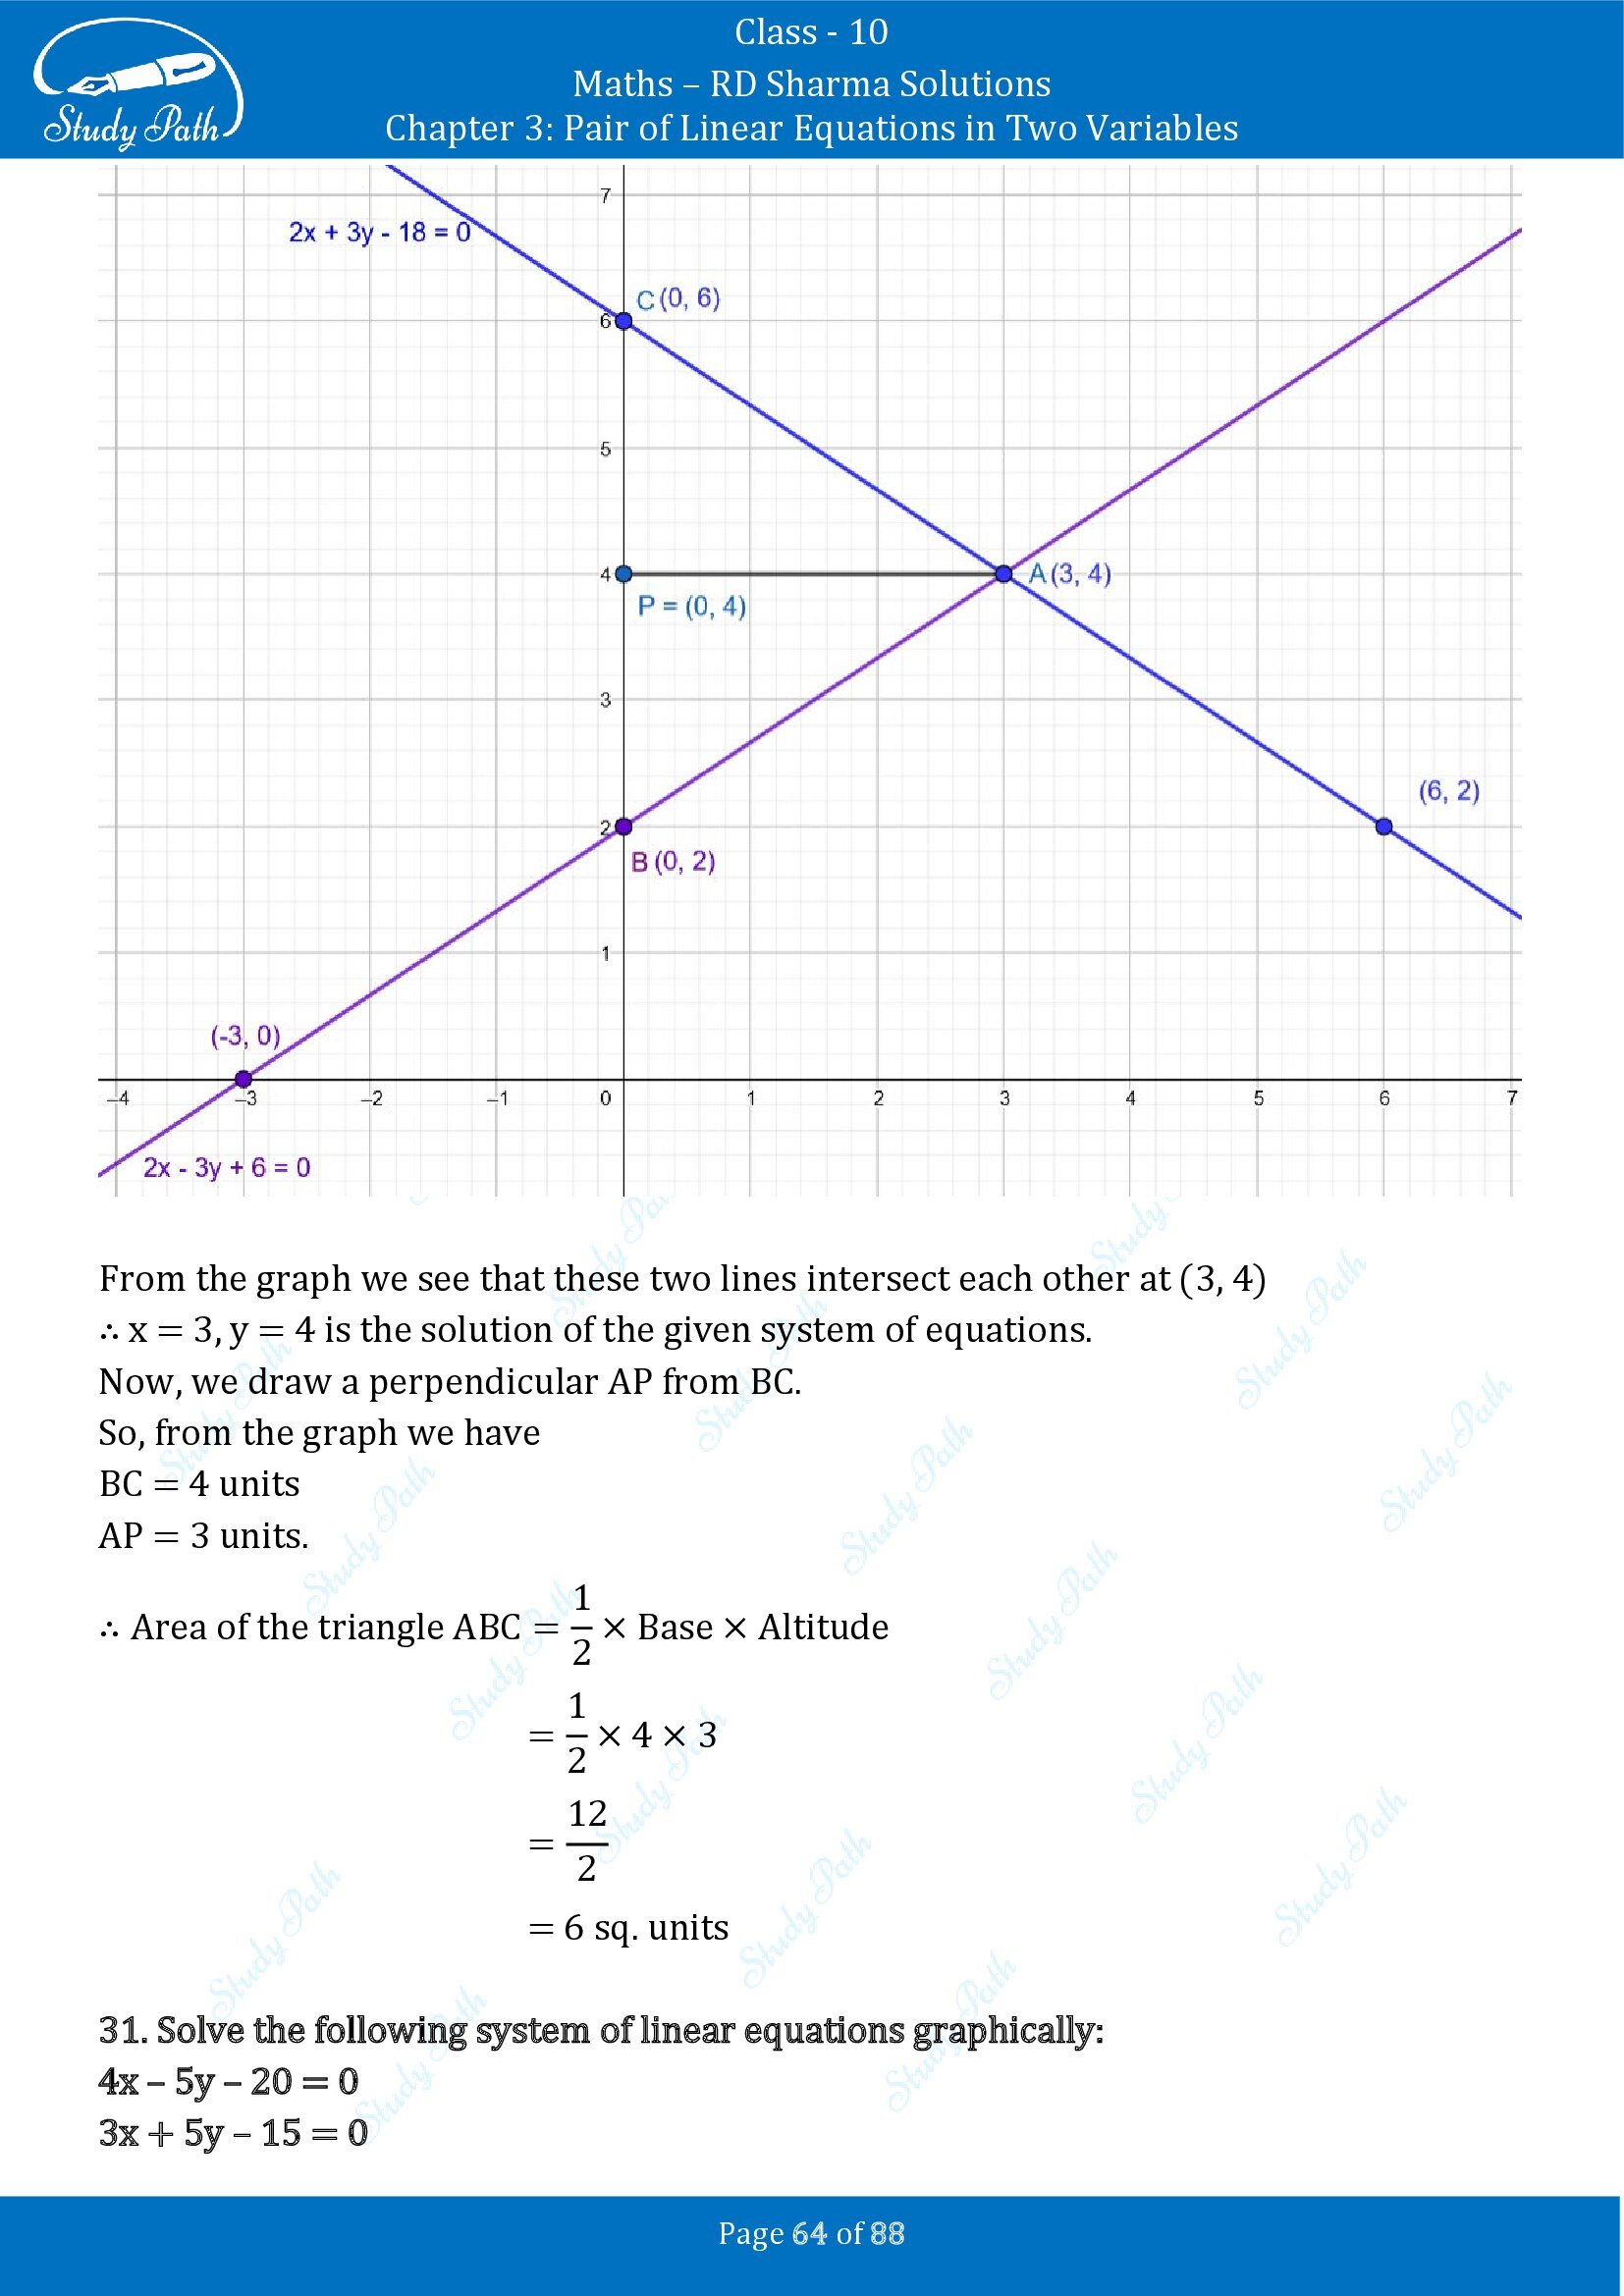 RD Sharma Solutions Class 10 Chapter 3 Pair of Linear Equations in Two Variables Exercise 3.2 00064